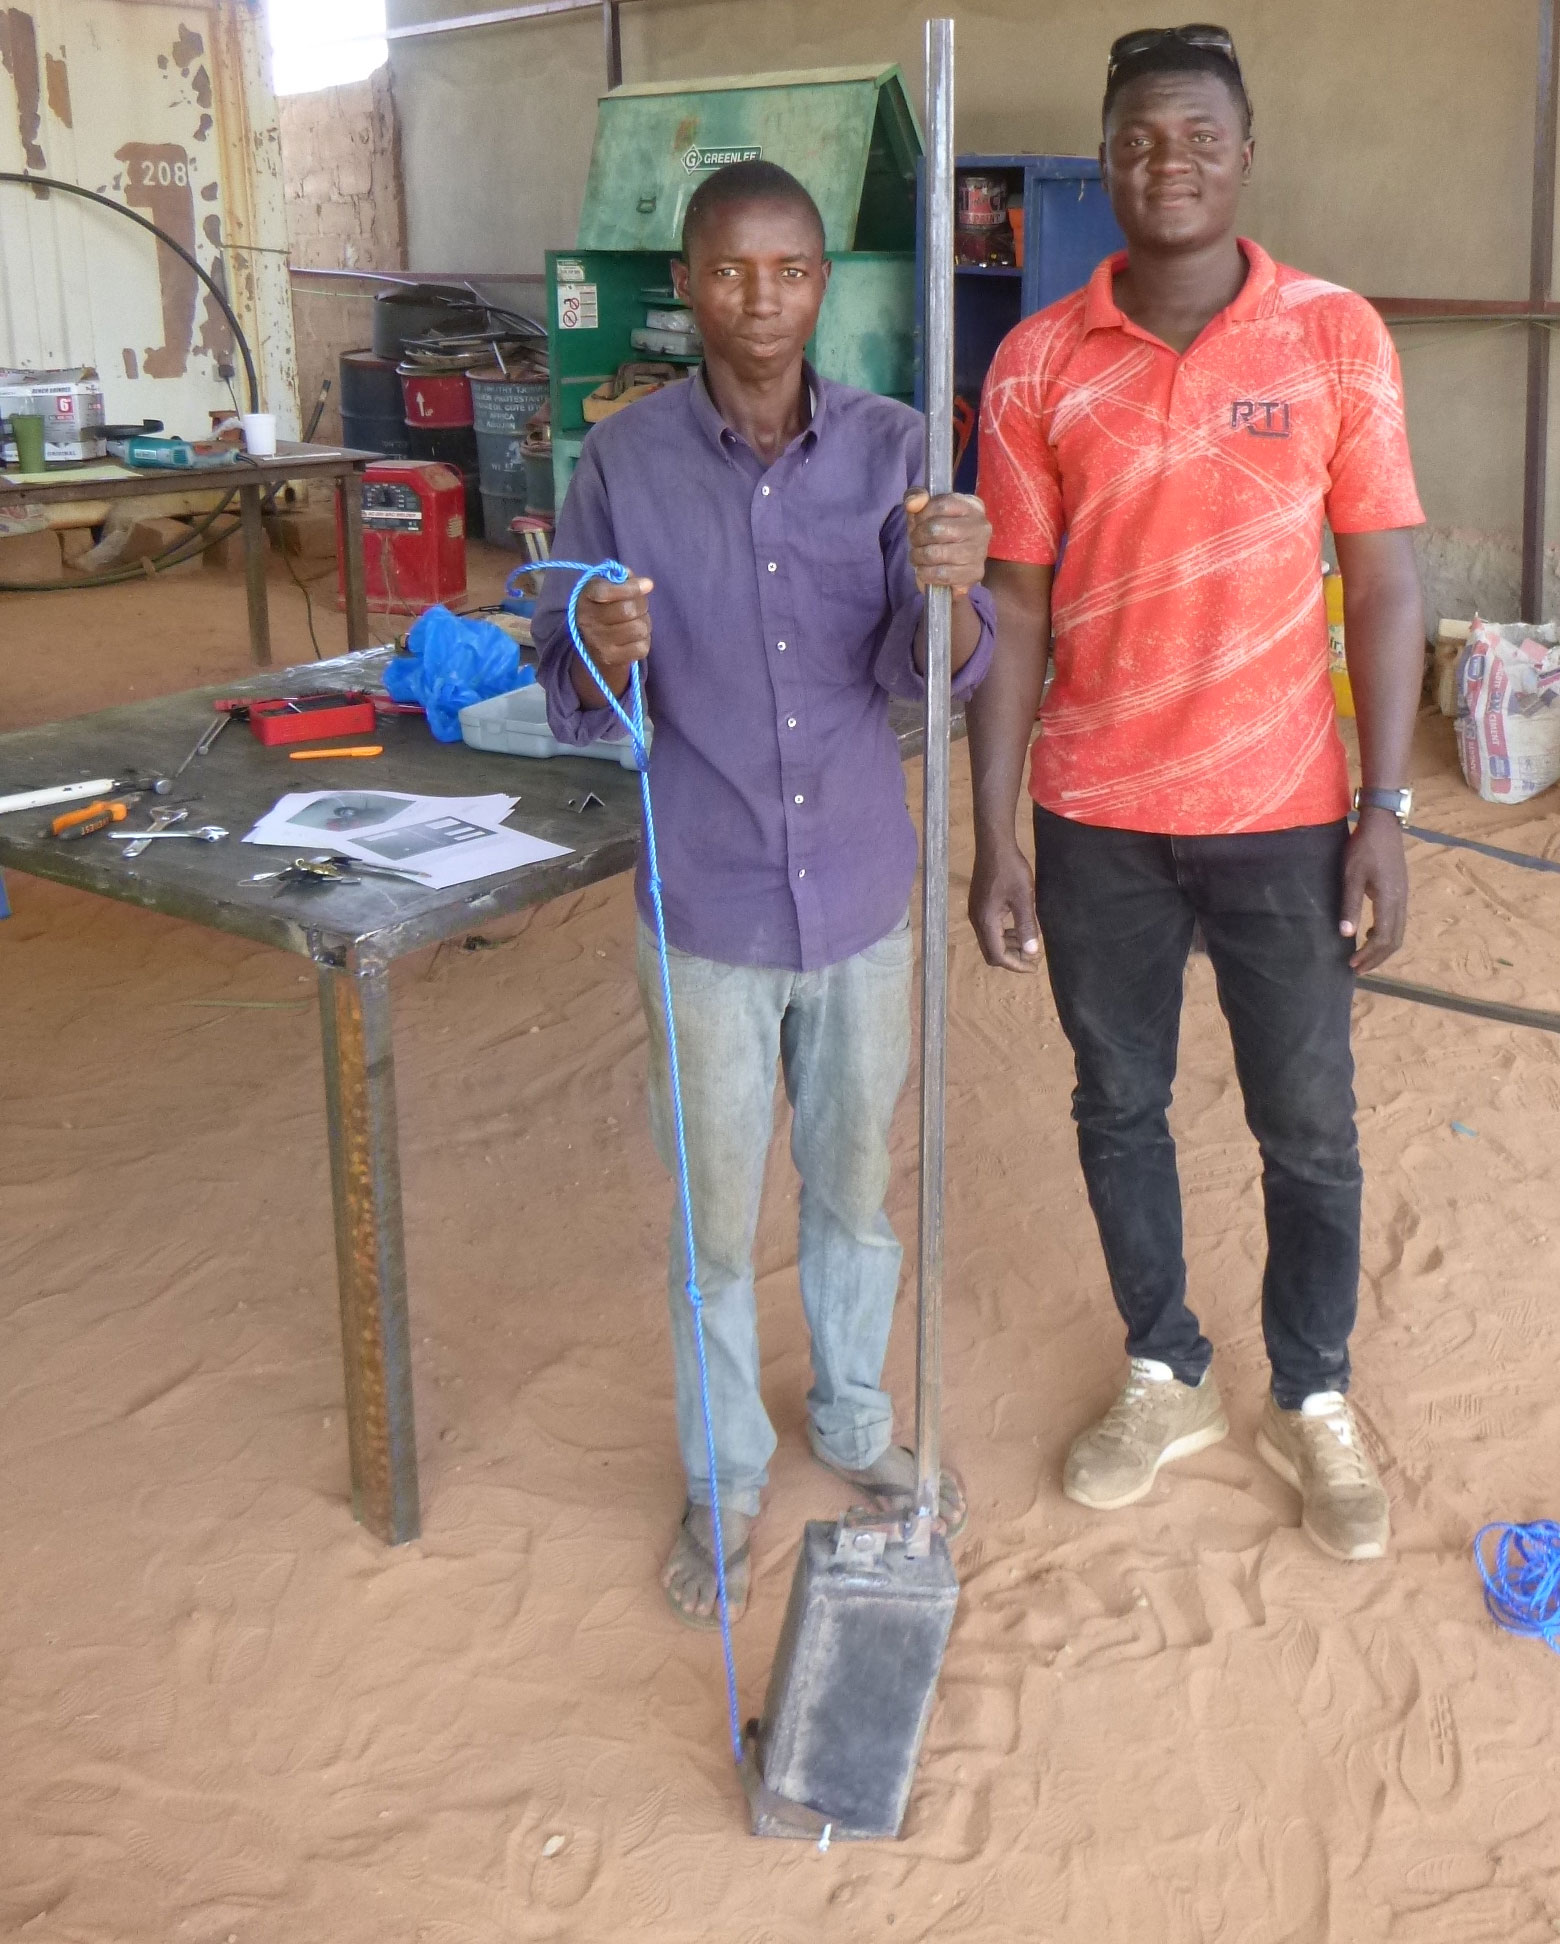 M. Hachimou Kadade (left) and Amos Mohammedou are at the SMART Centre displaying the Sludge Digger they fabricated together.